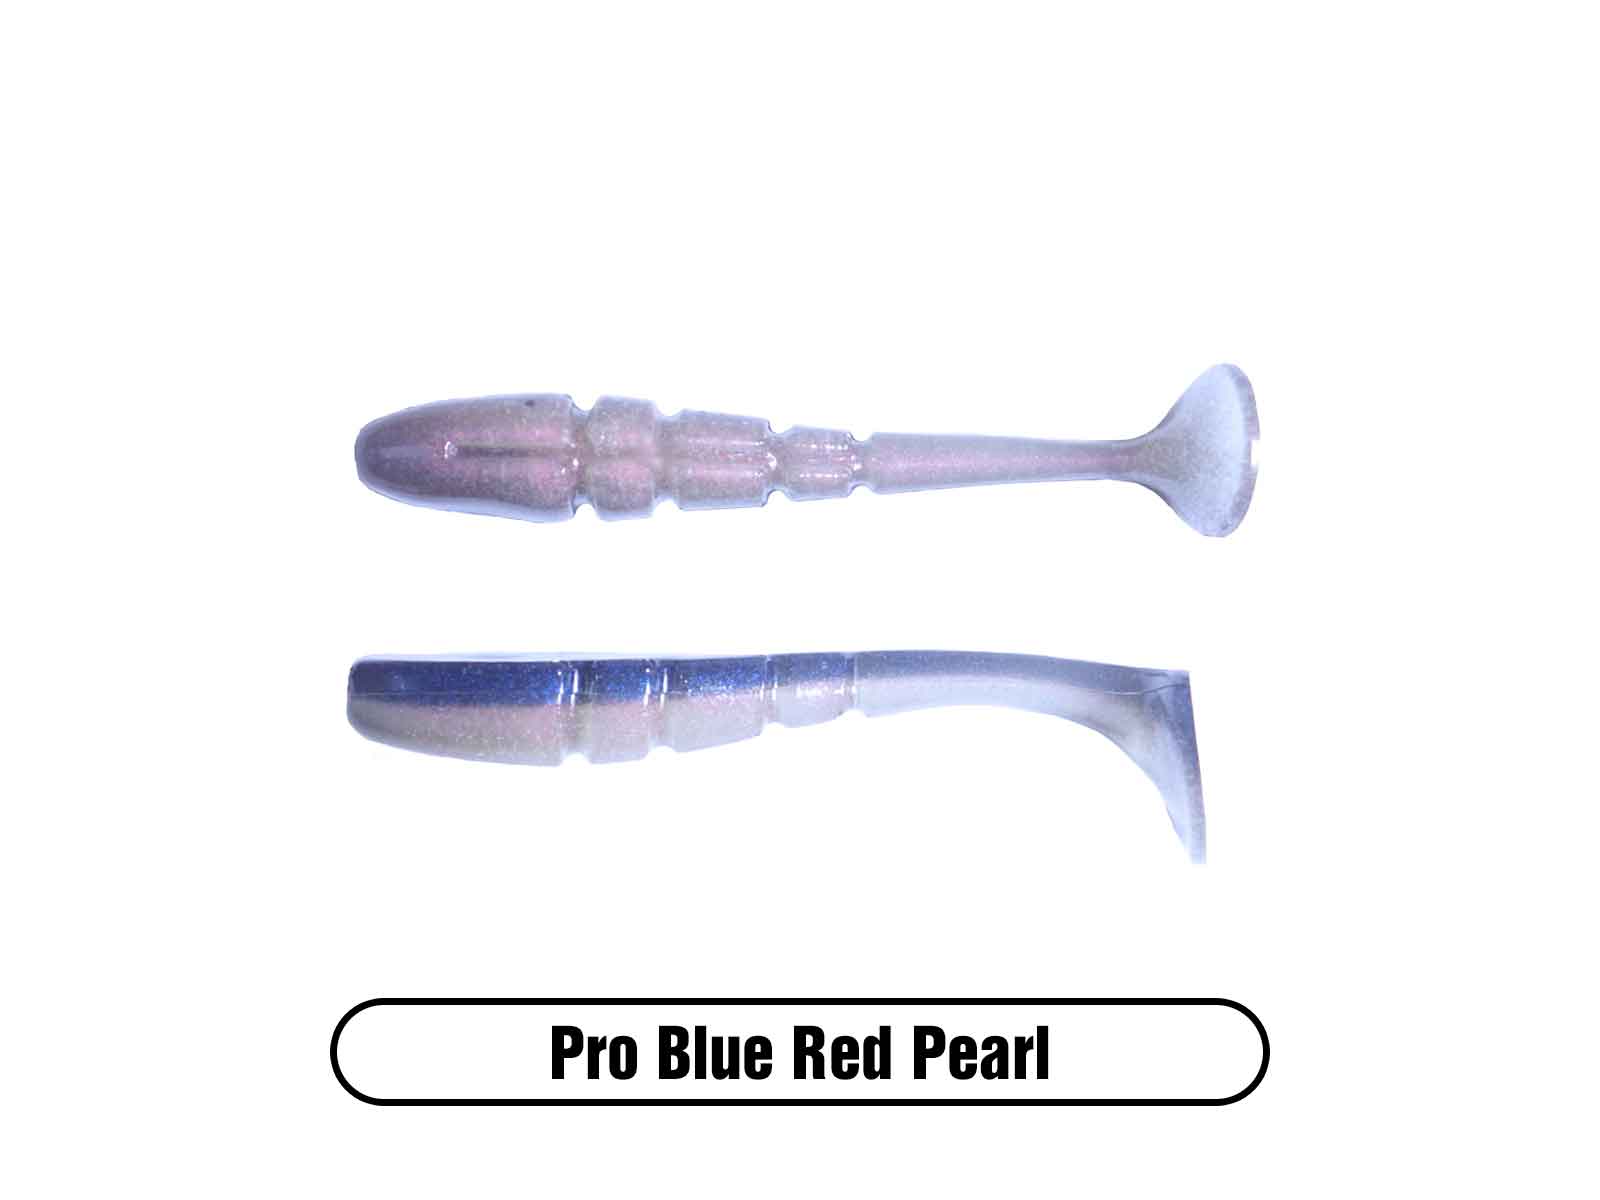 2.75 Swammer Swimbait Pro Blue Red Pearl